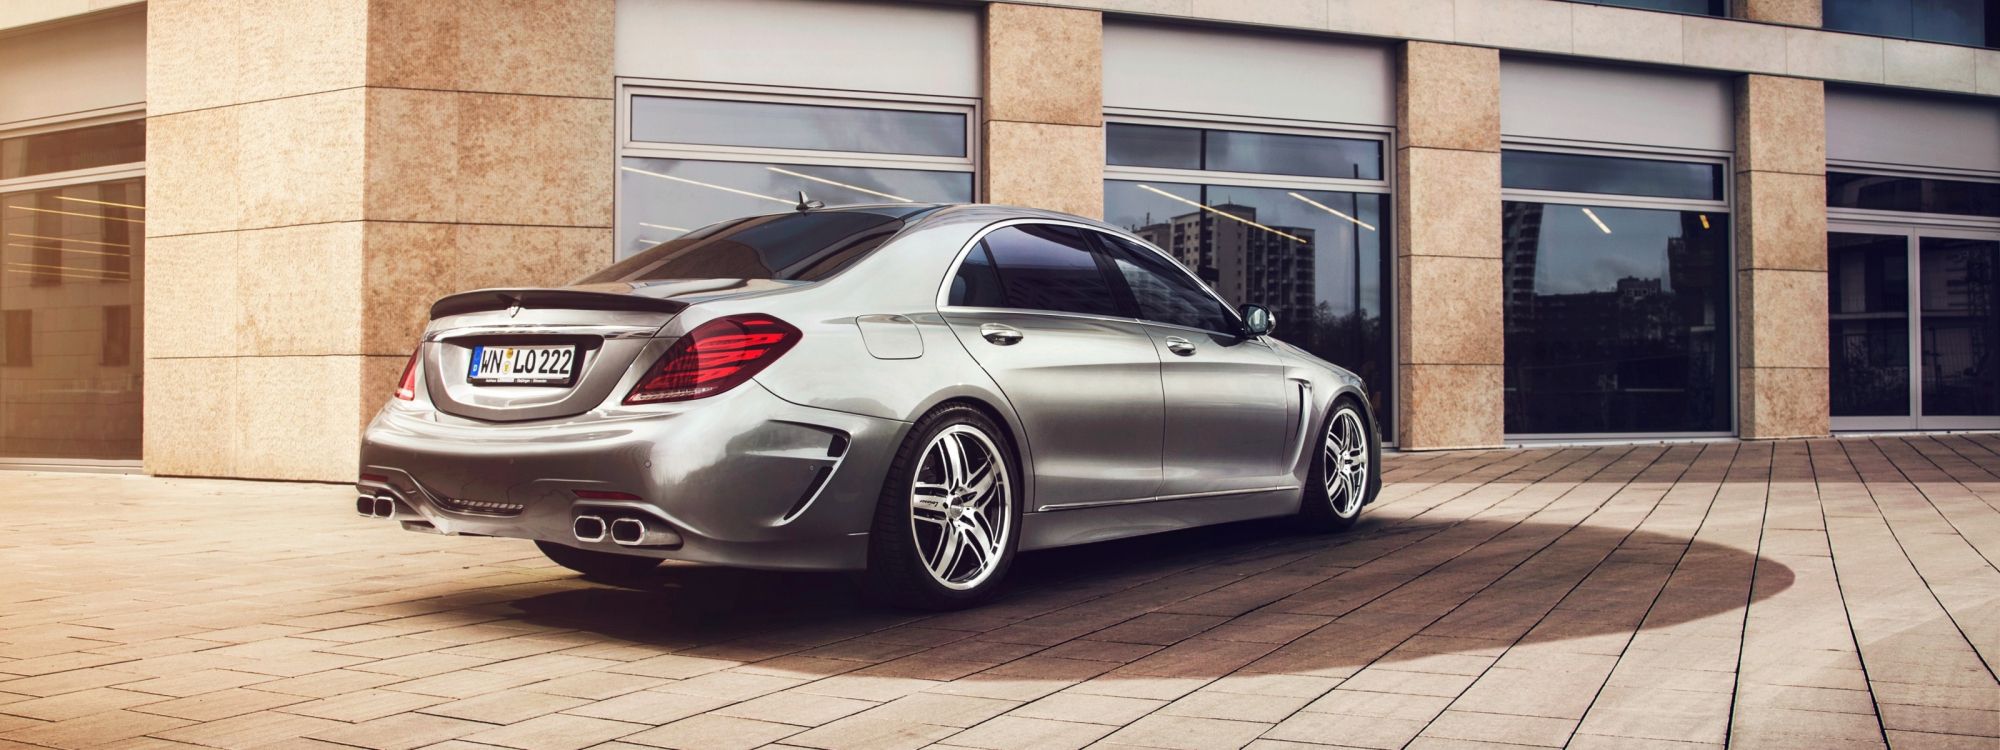 Silver Mercedes Benz Coupe Parked on Brown Brick Floor. Wallpaper in 3200x1200 Resolution